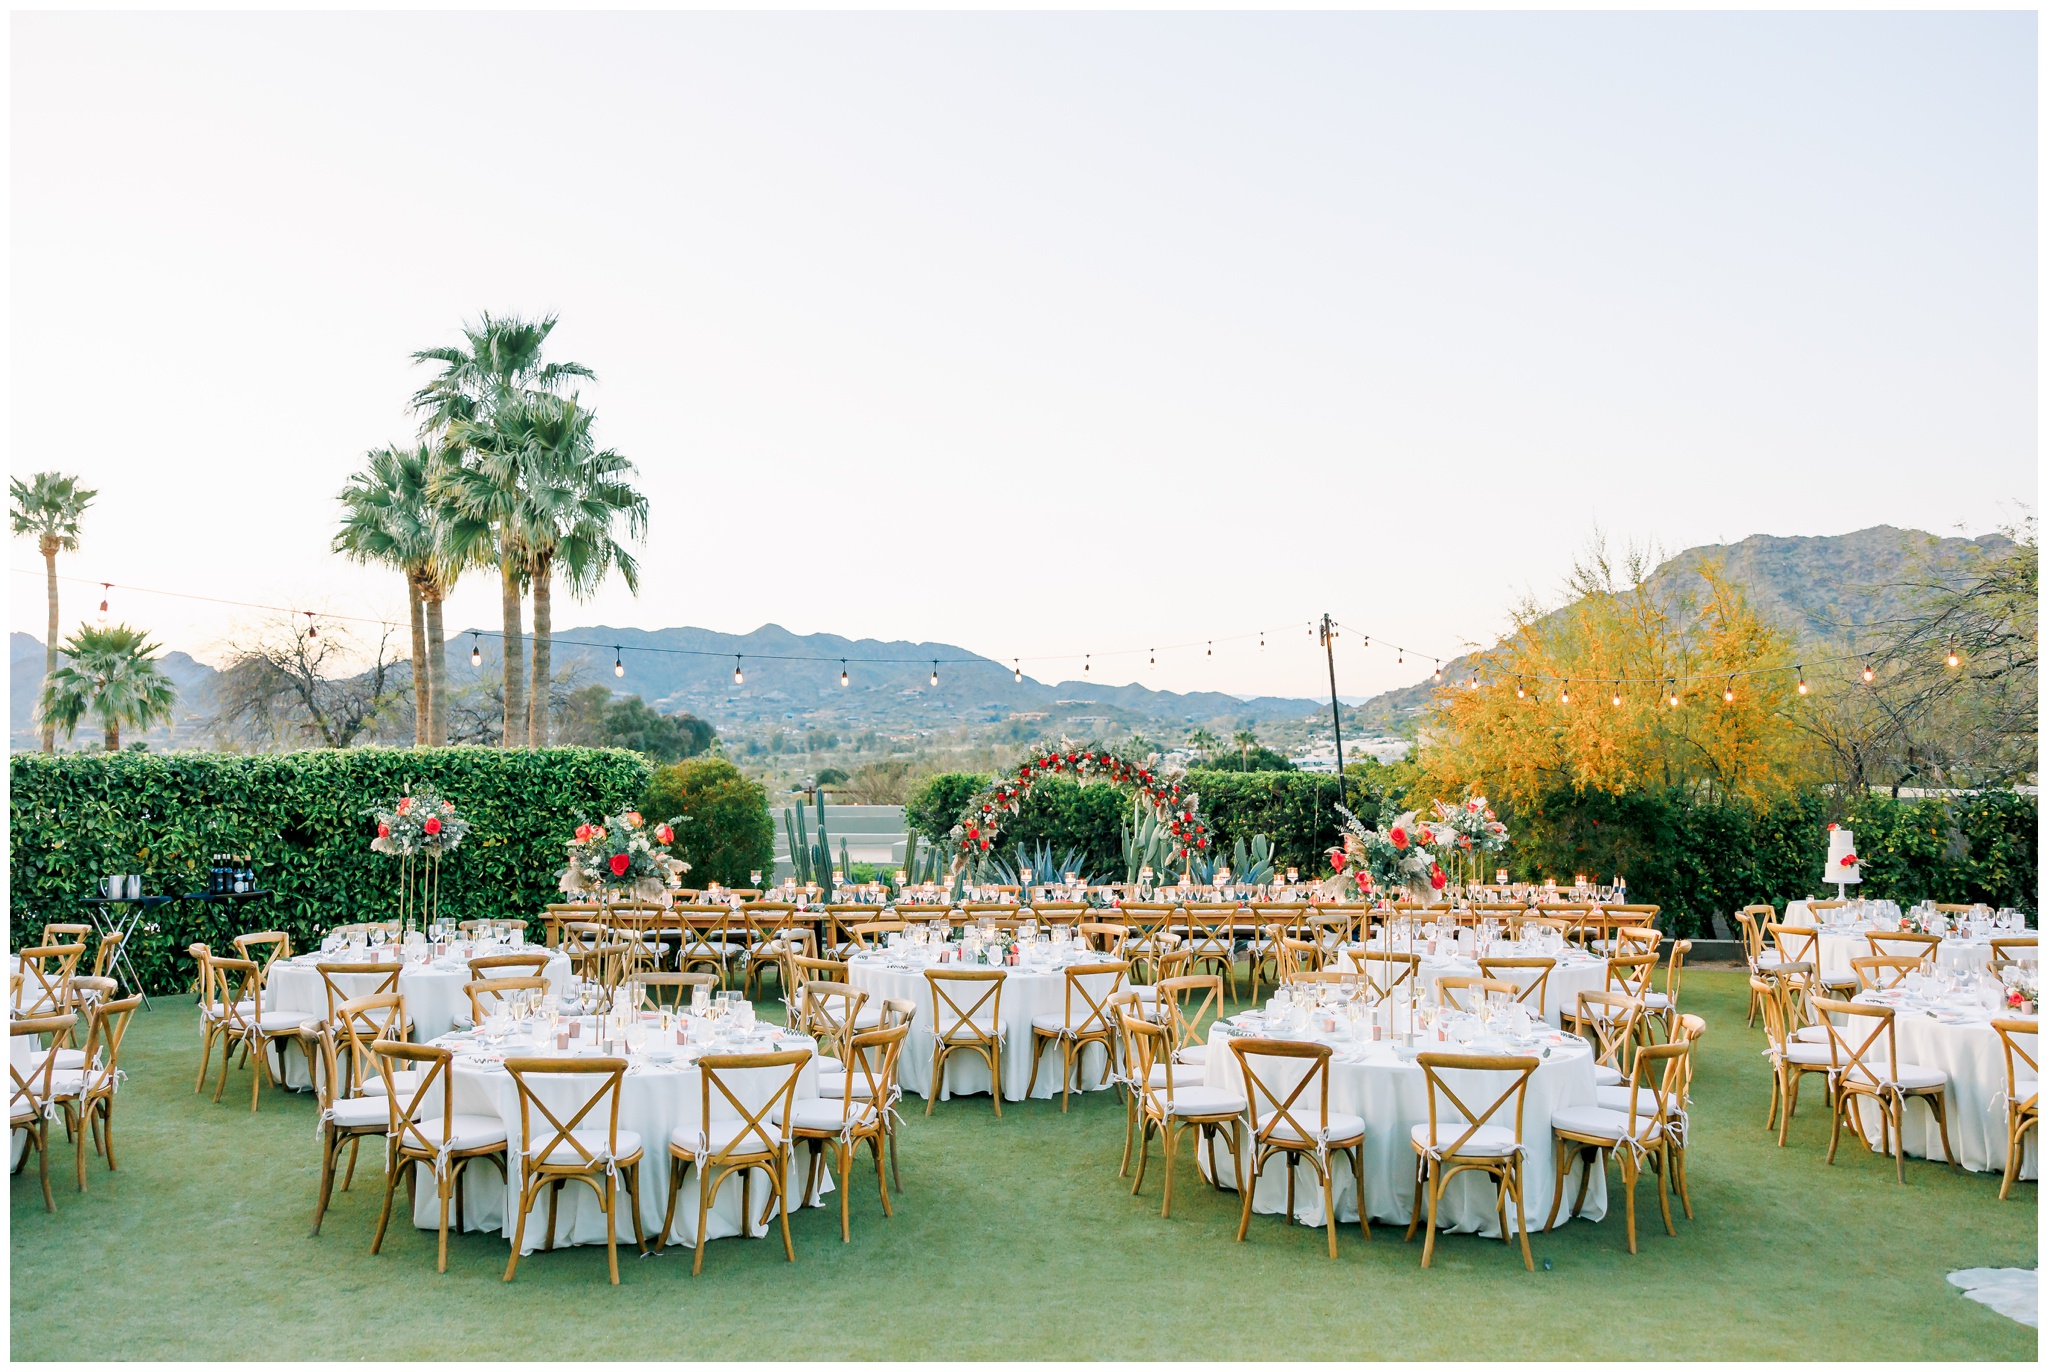 Reception decor set upon the lawn at Sanctuary at Camelback